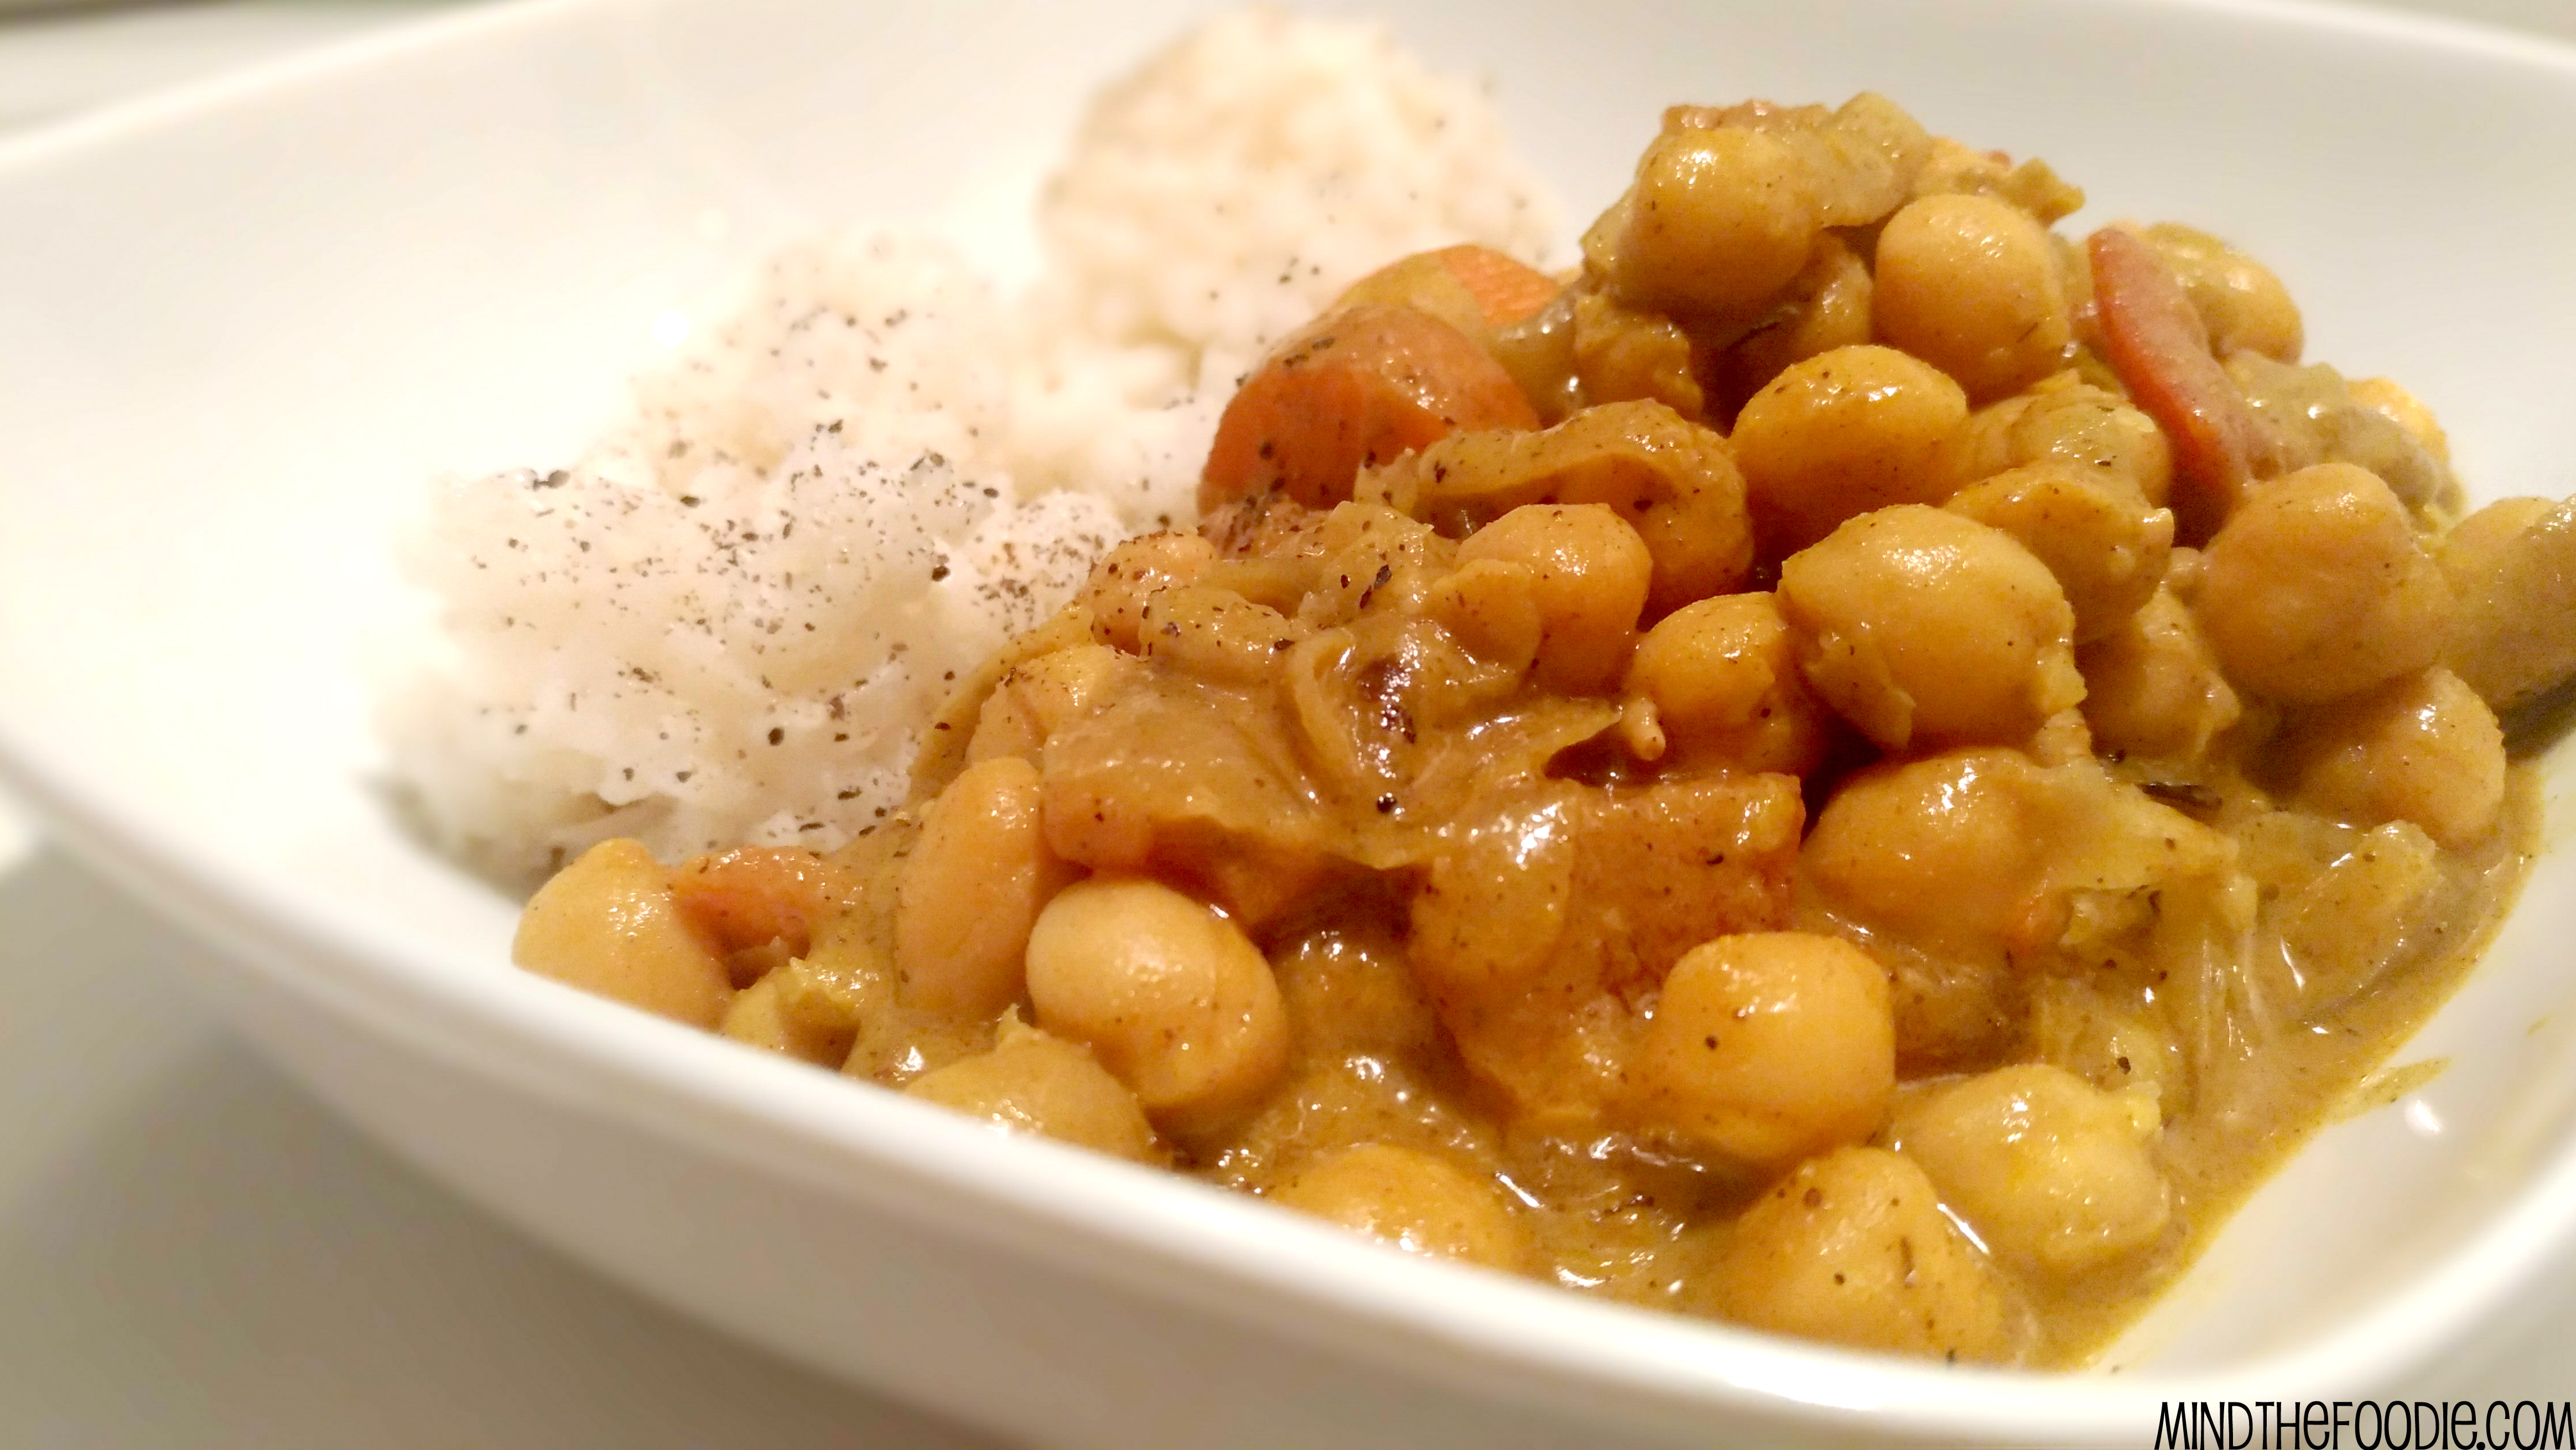 CHICKPEA CURRY